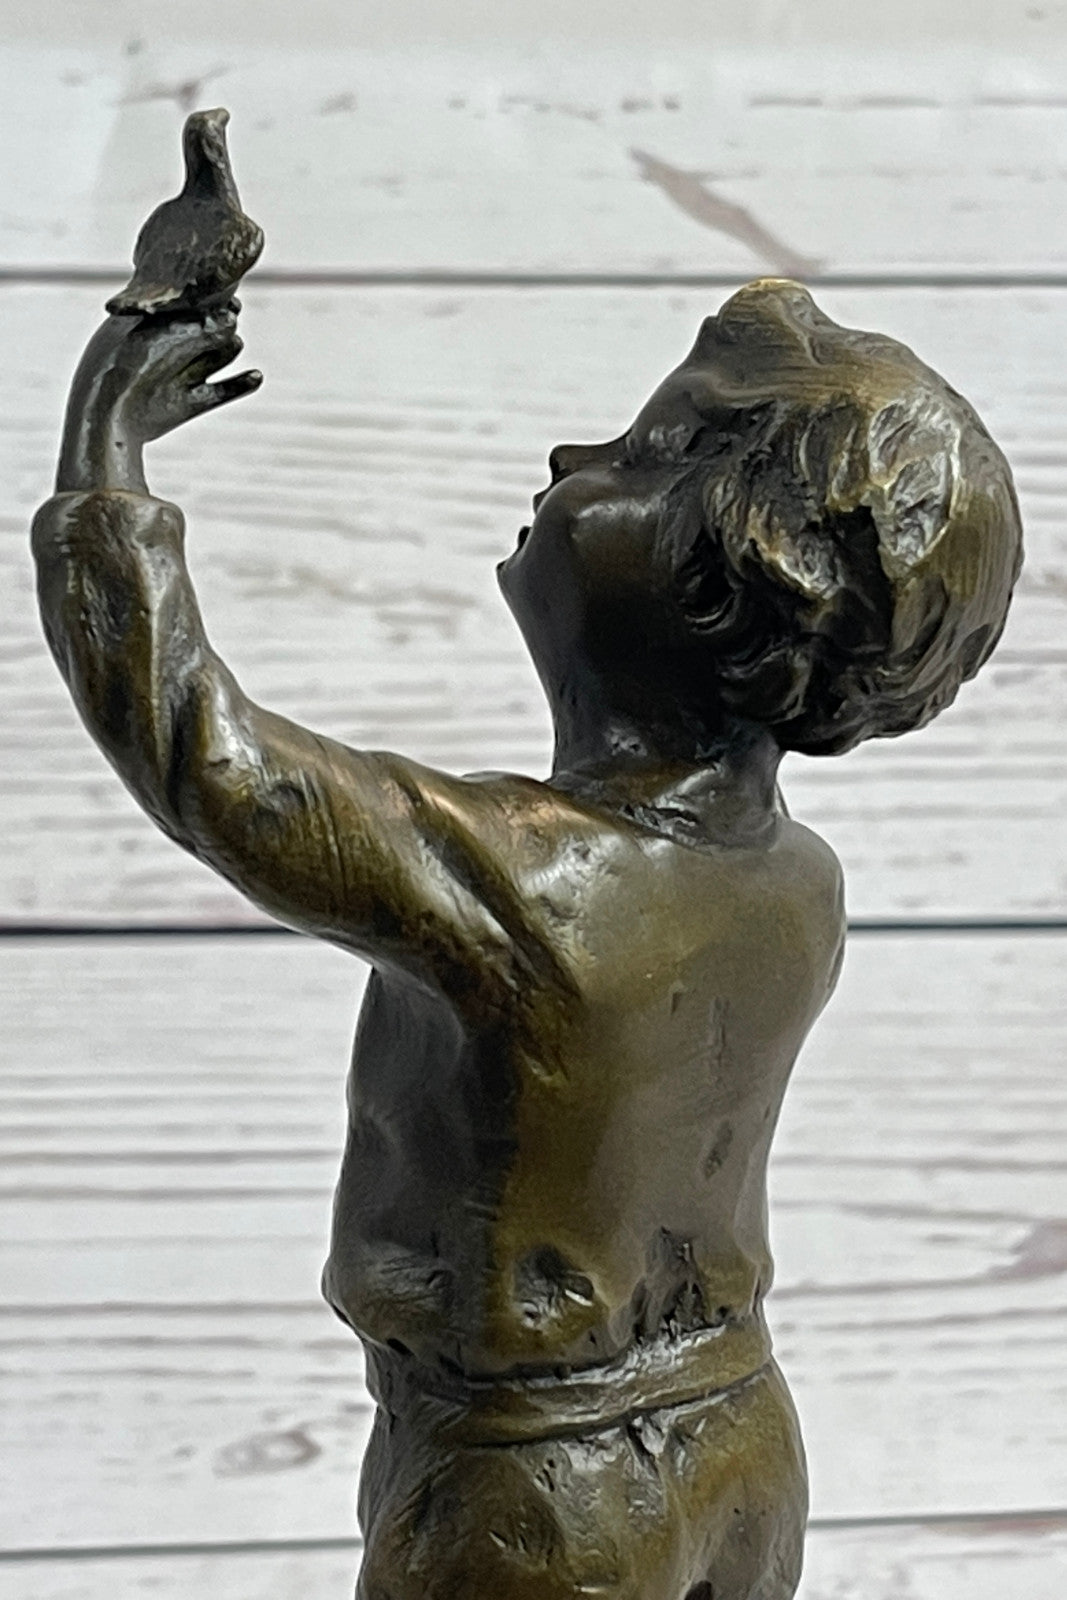 Milo`s Artistry: Intricate Bronze Statue of a Boy Holding a Bird - Handmade by Miguel Lopez